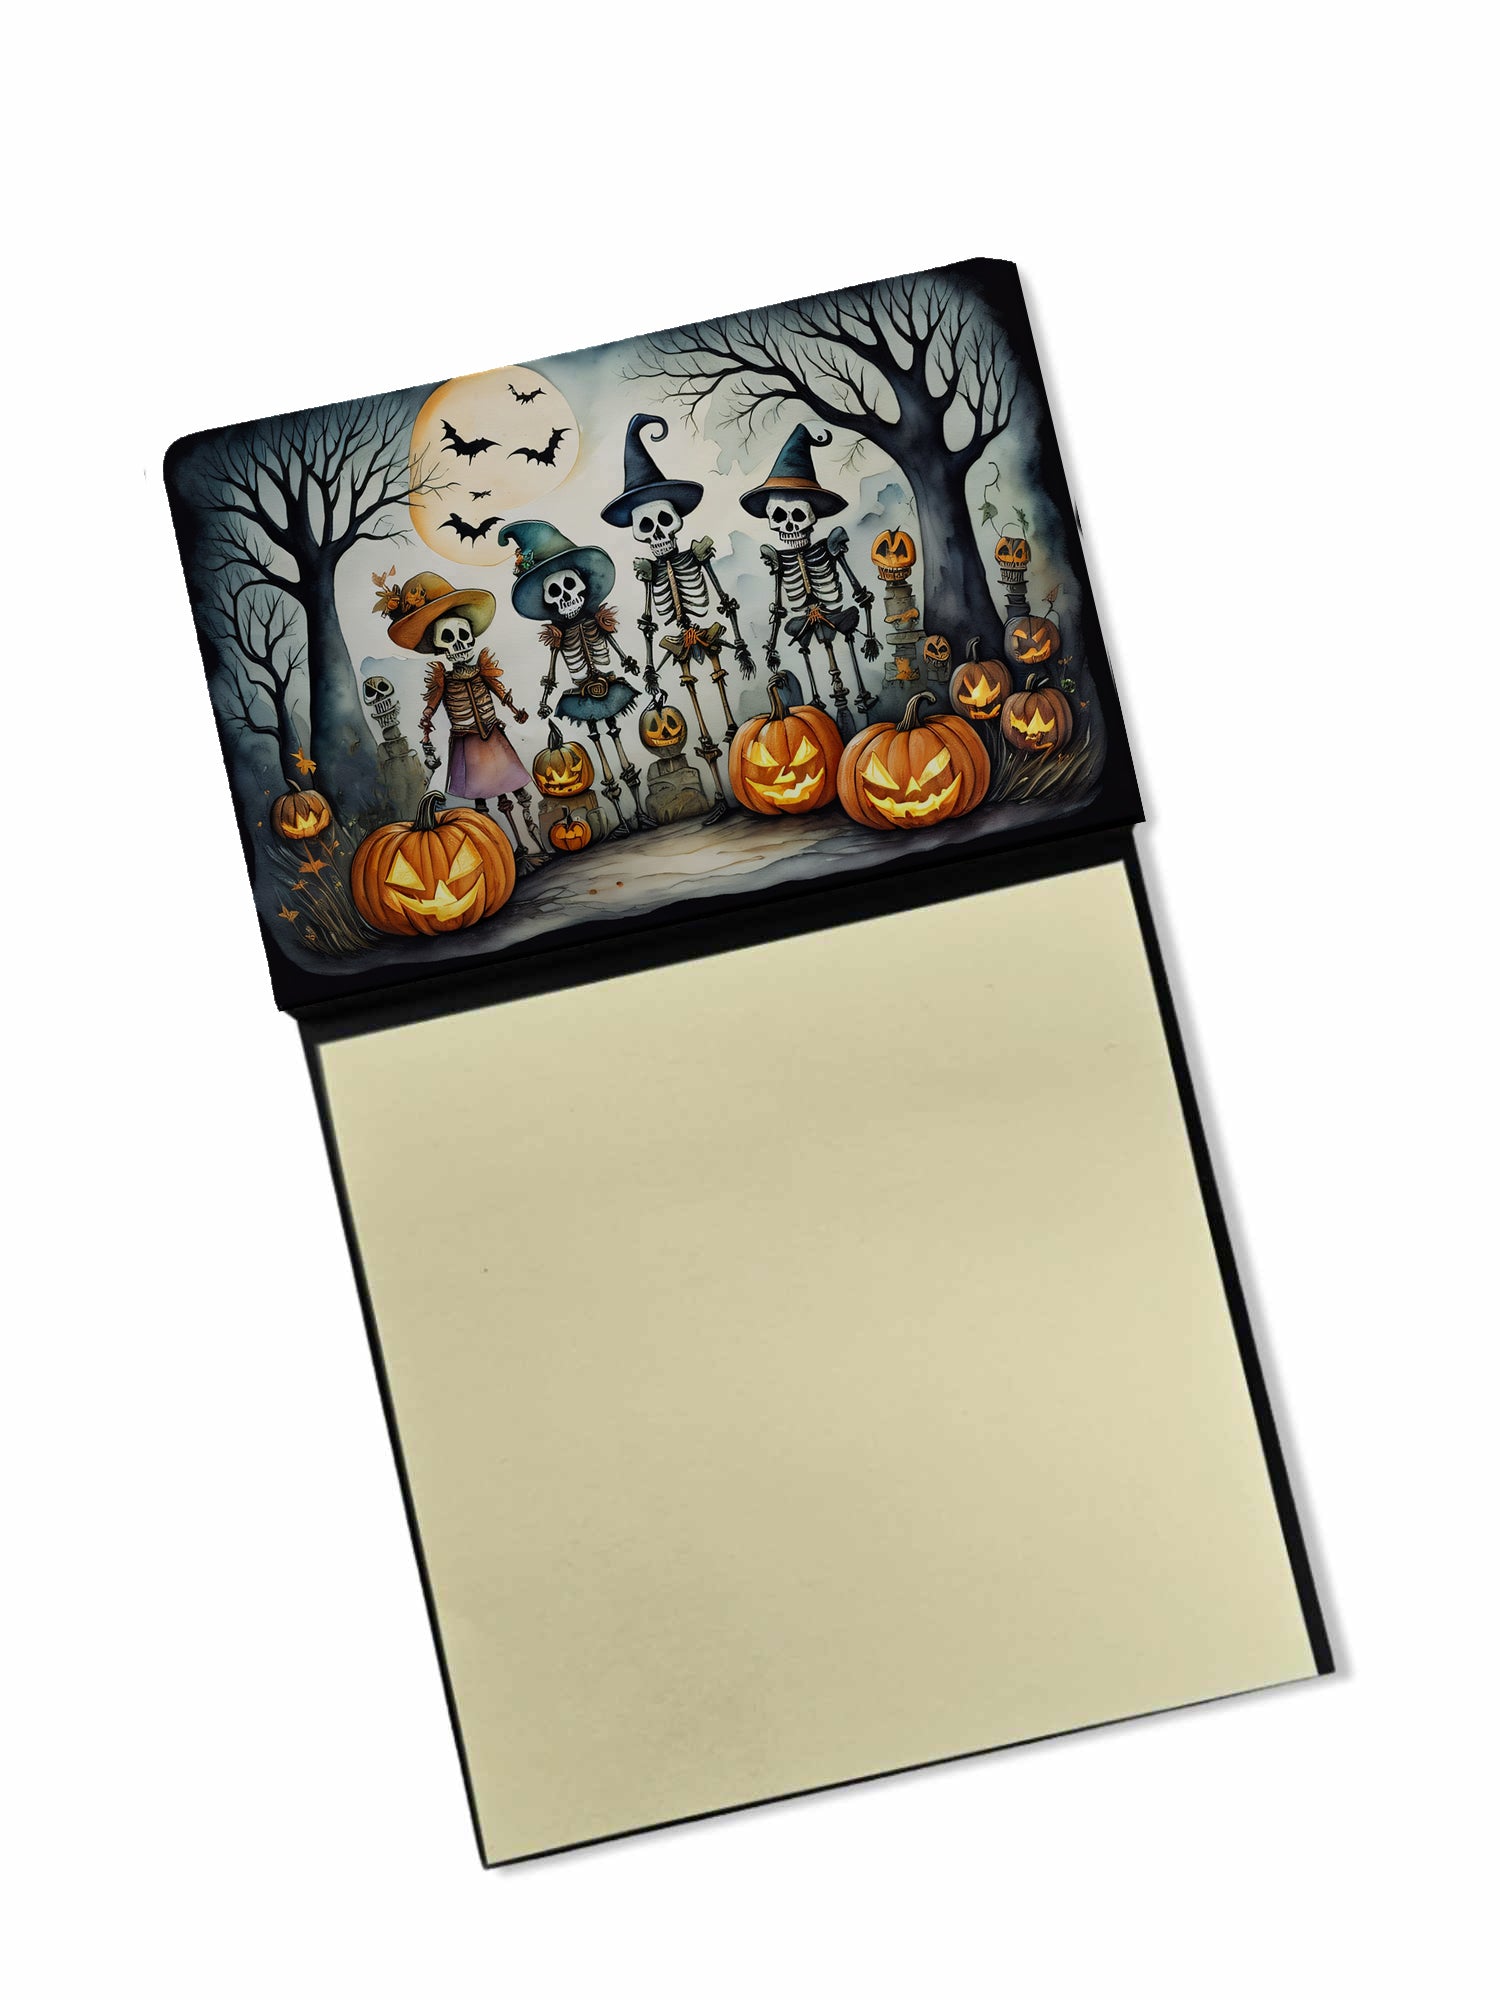 Buy this Calacas Skeletons Spooky Halloween Sticky Note Holder